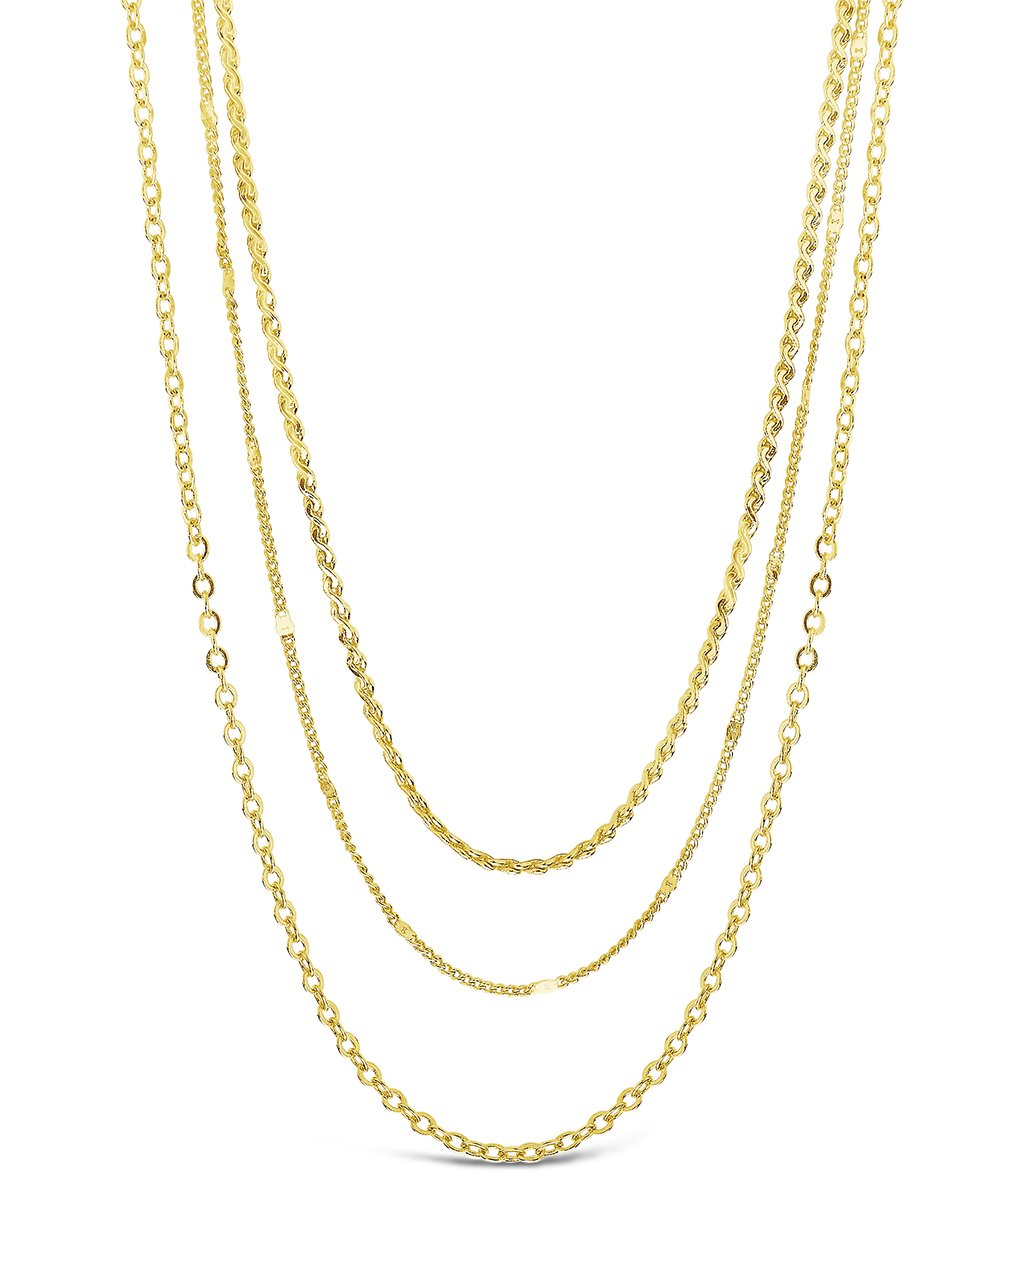 Dainty Three Layer Chain Necklace Necklace Sterling Forever Gold 